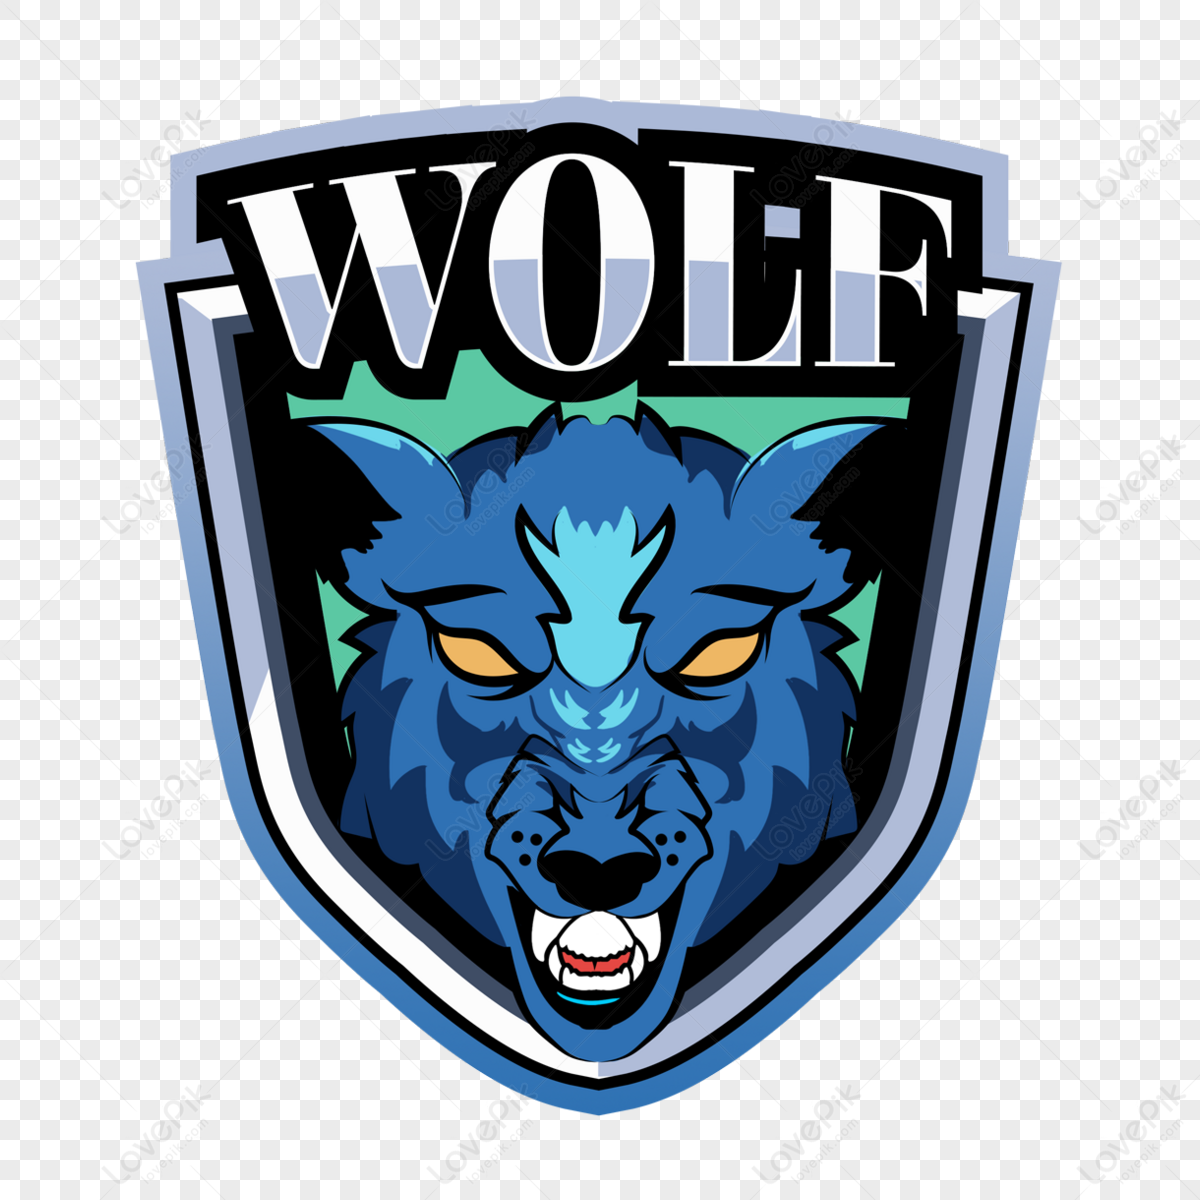 Gray wolf Logo Black wolf Clip art - totem vector png download - 512*512 -  Free Transparent Gray Wolf png Download. - Clip Art Library